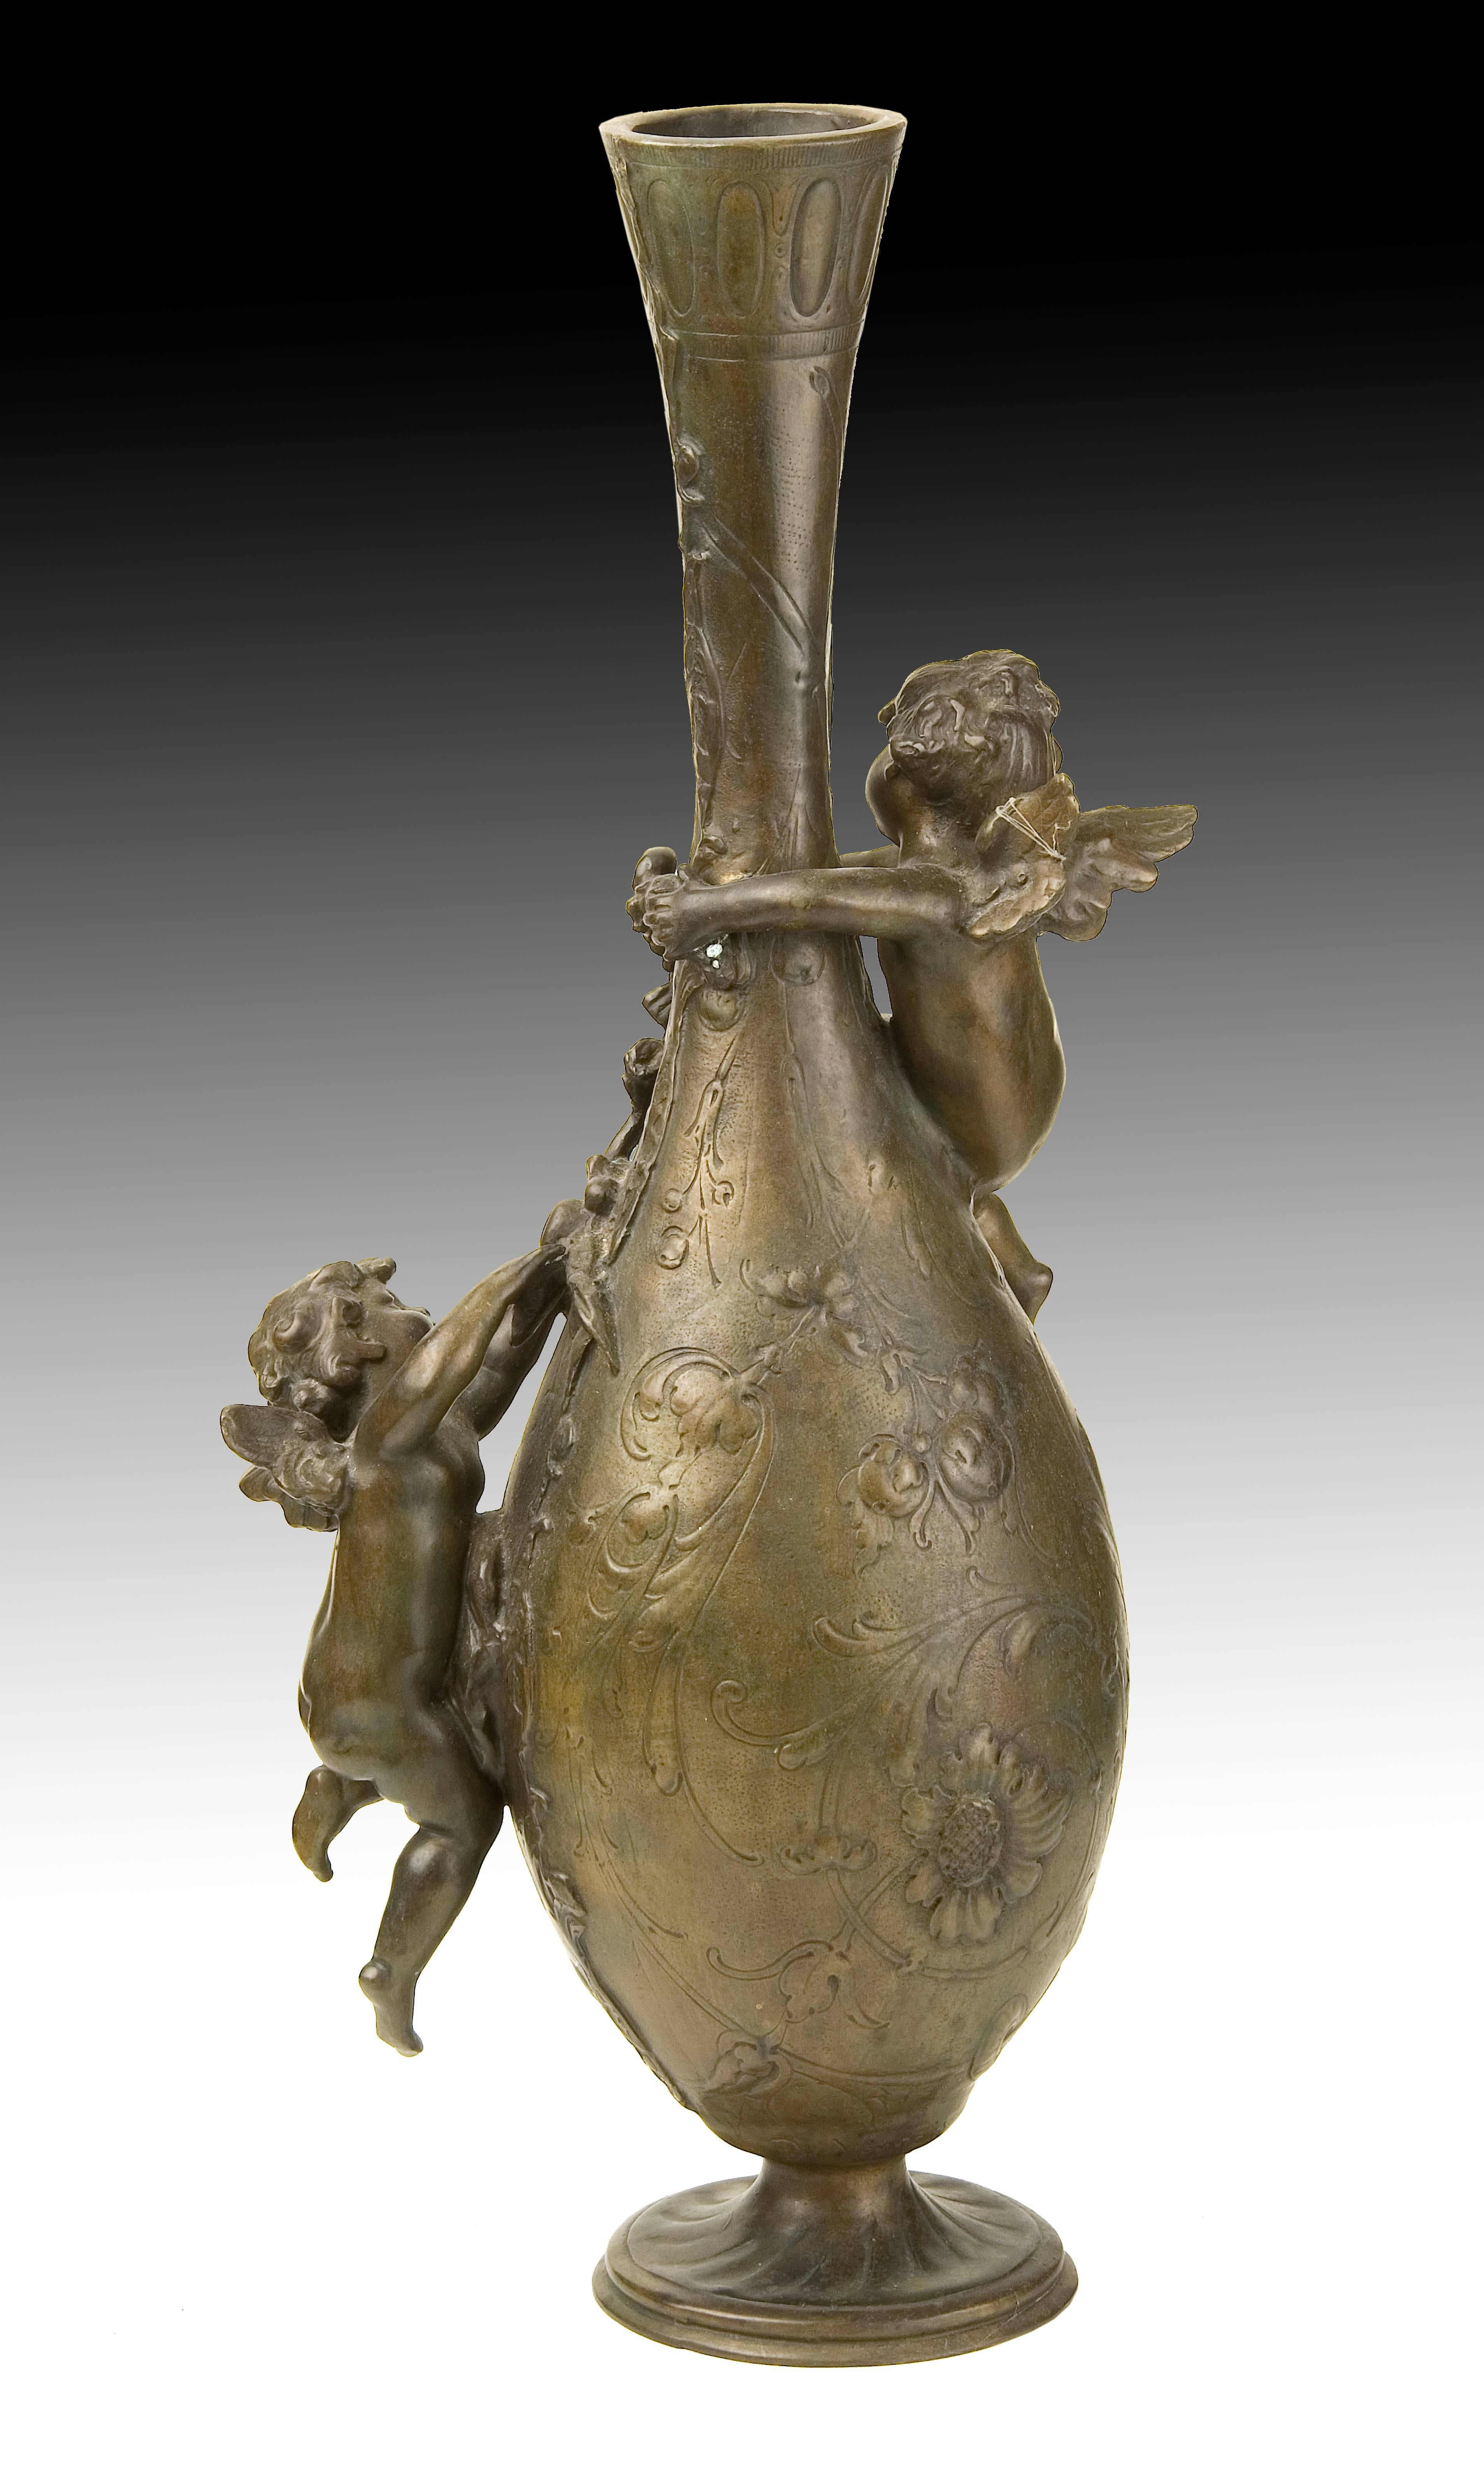 Bronze vase with cherubs or cupids, 19th-20th centuries.
Vase with circular base, oval body and elongated neck decorated with two figures of cupids or cherubs and a series of elements and flowers of clear neoclassical influence. This type of